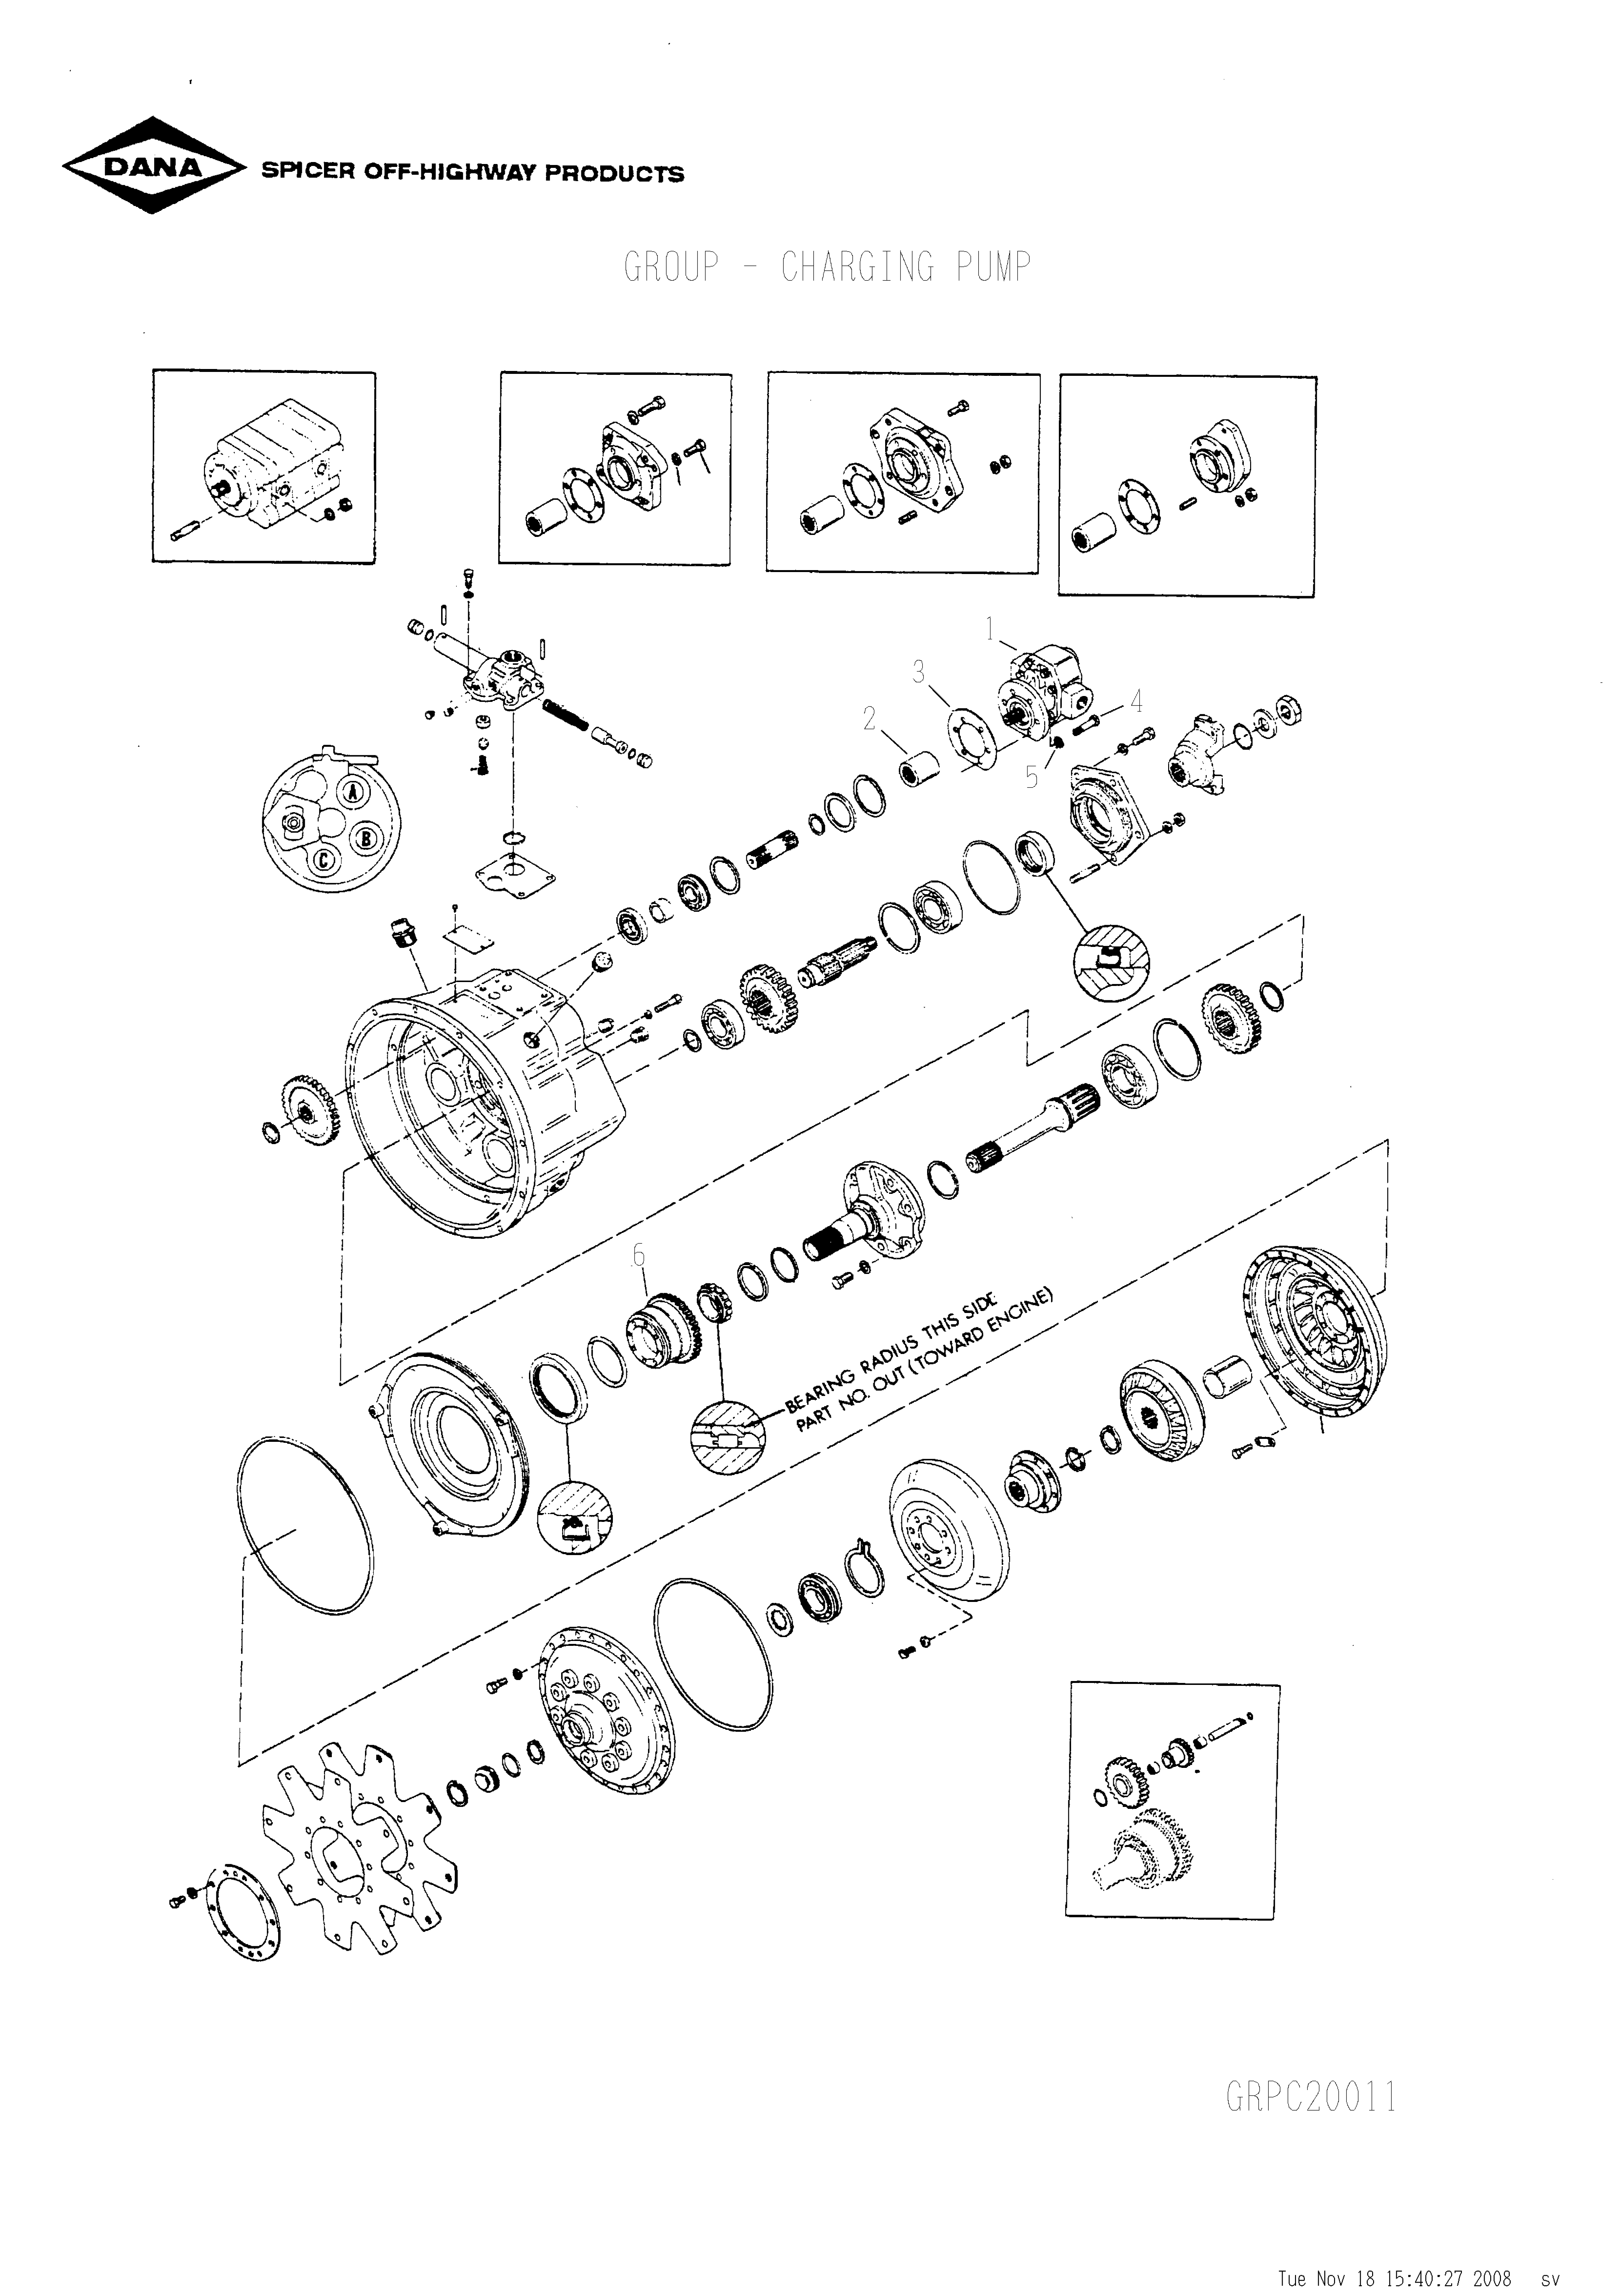 drawing for TELEDYNE SPECIALITY EQUIPMENT 1004614 - GASKET (figure 2)